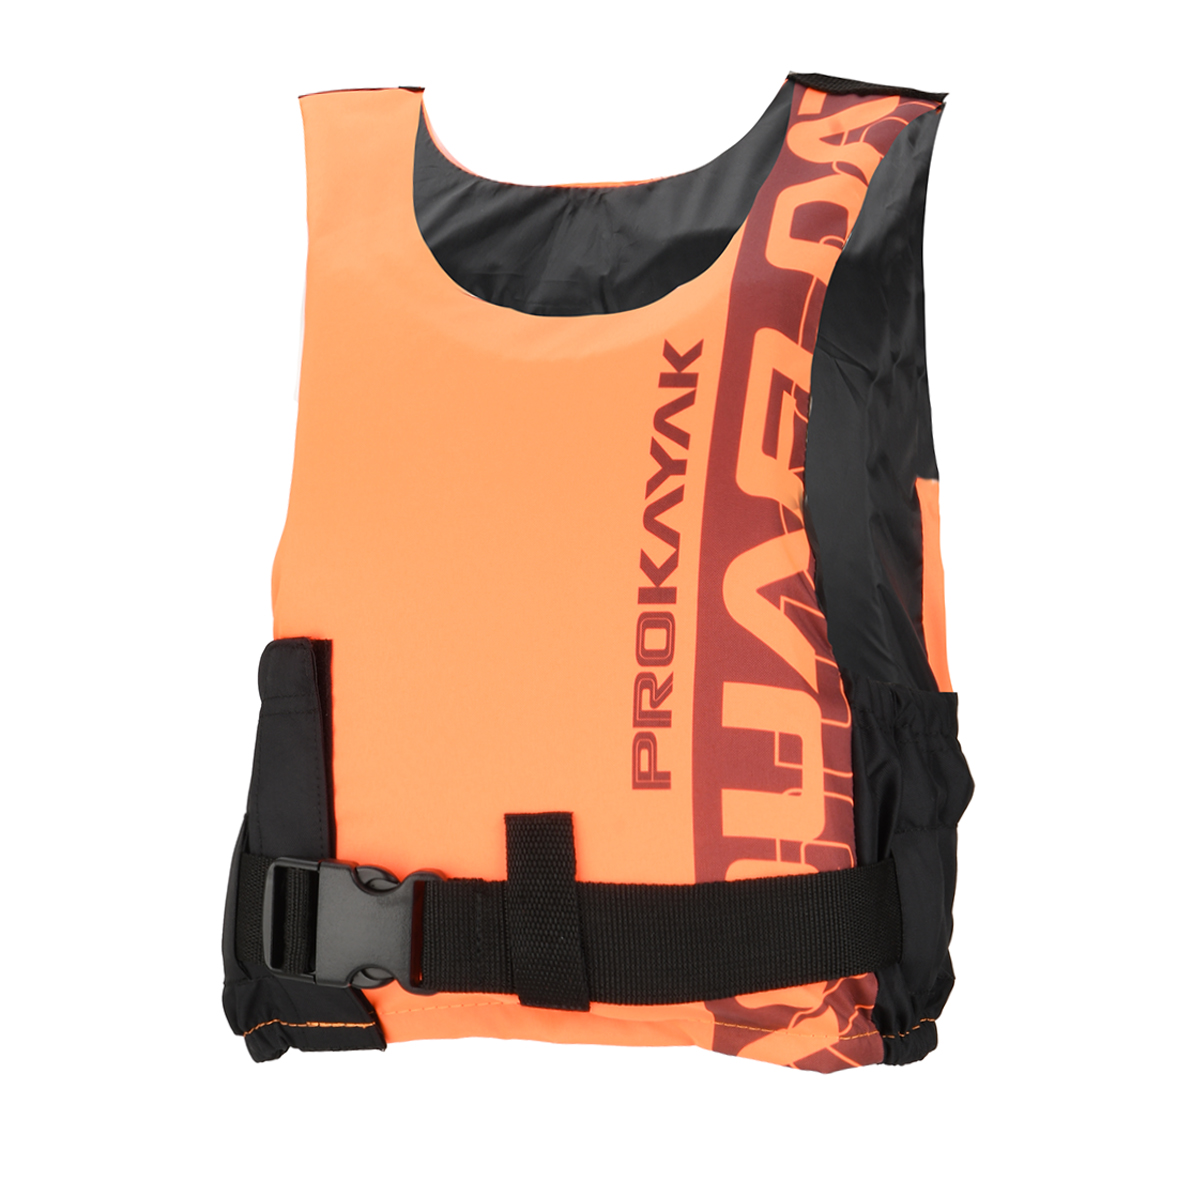 Chaleco inflable Aquafloat Pro Kayak,  image number null